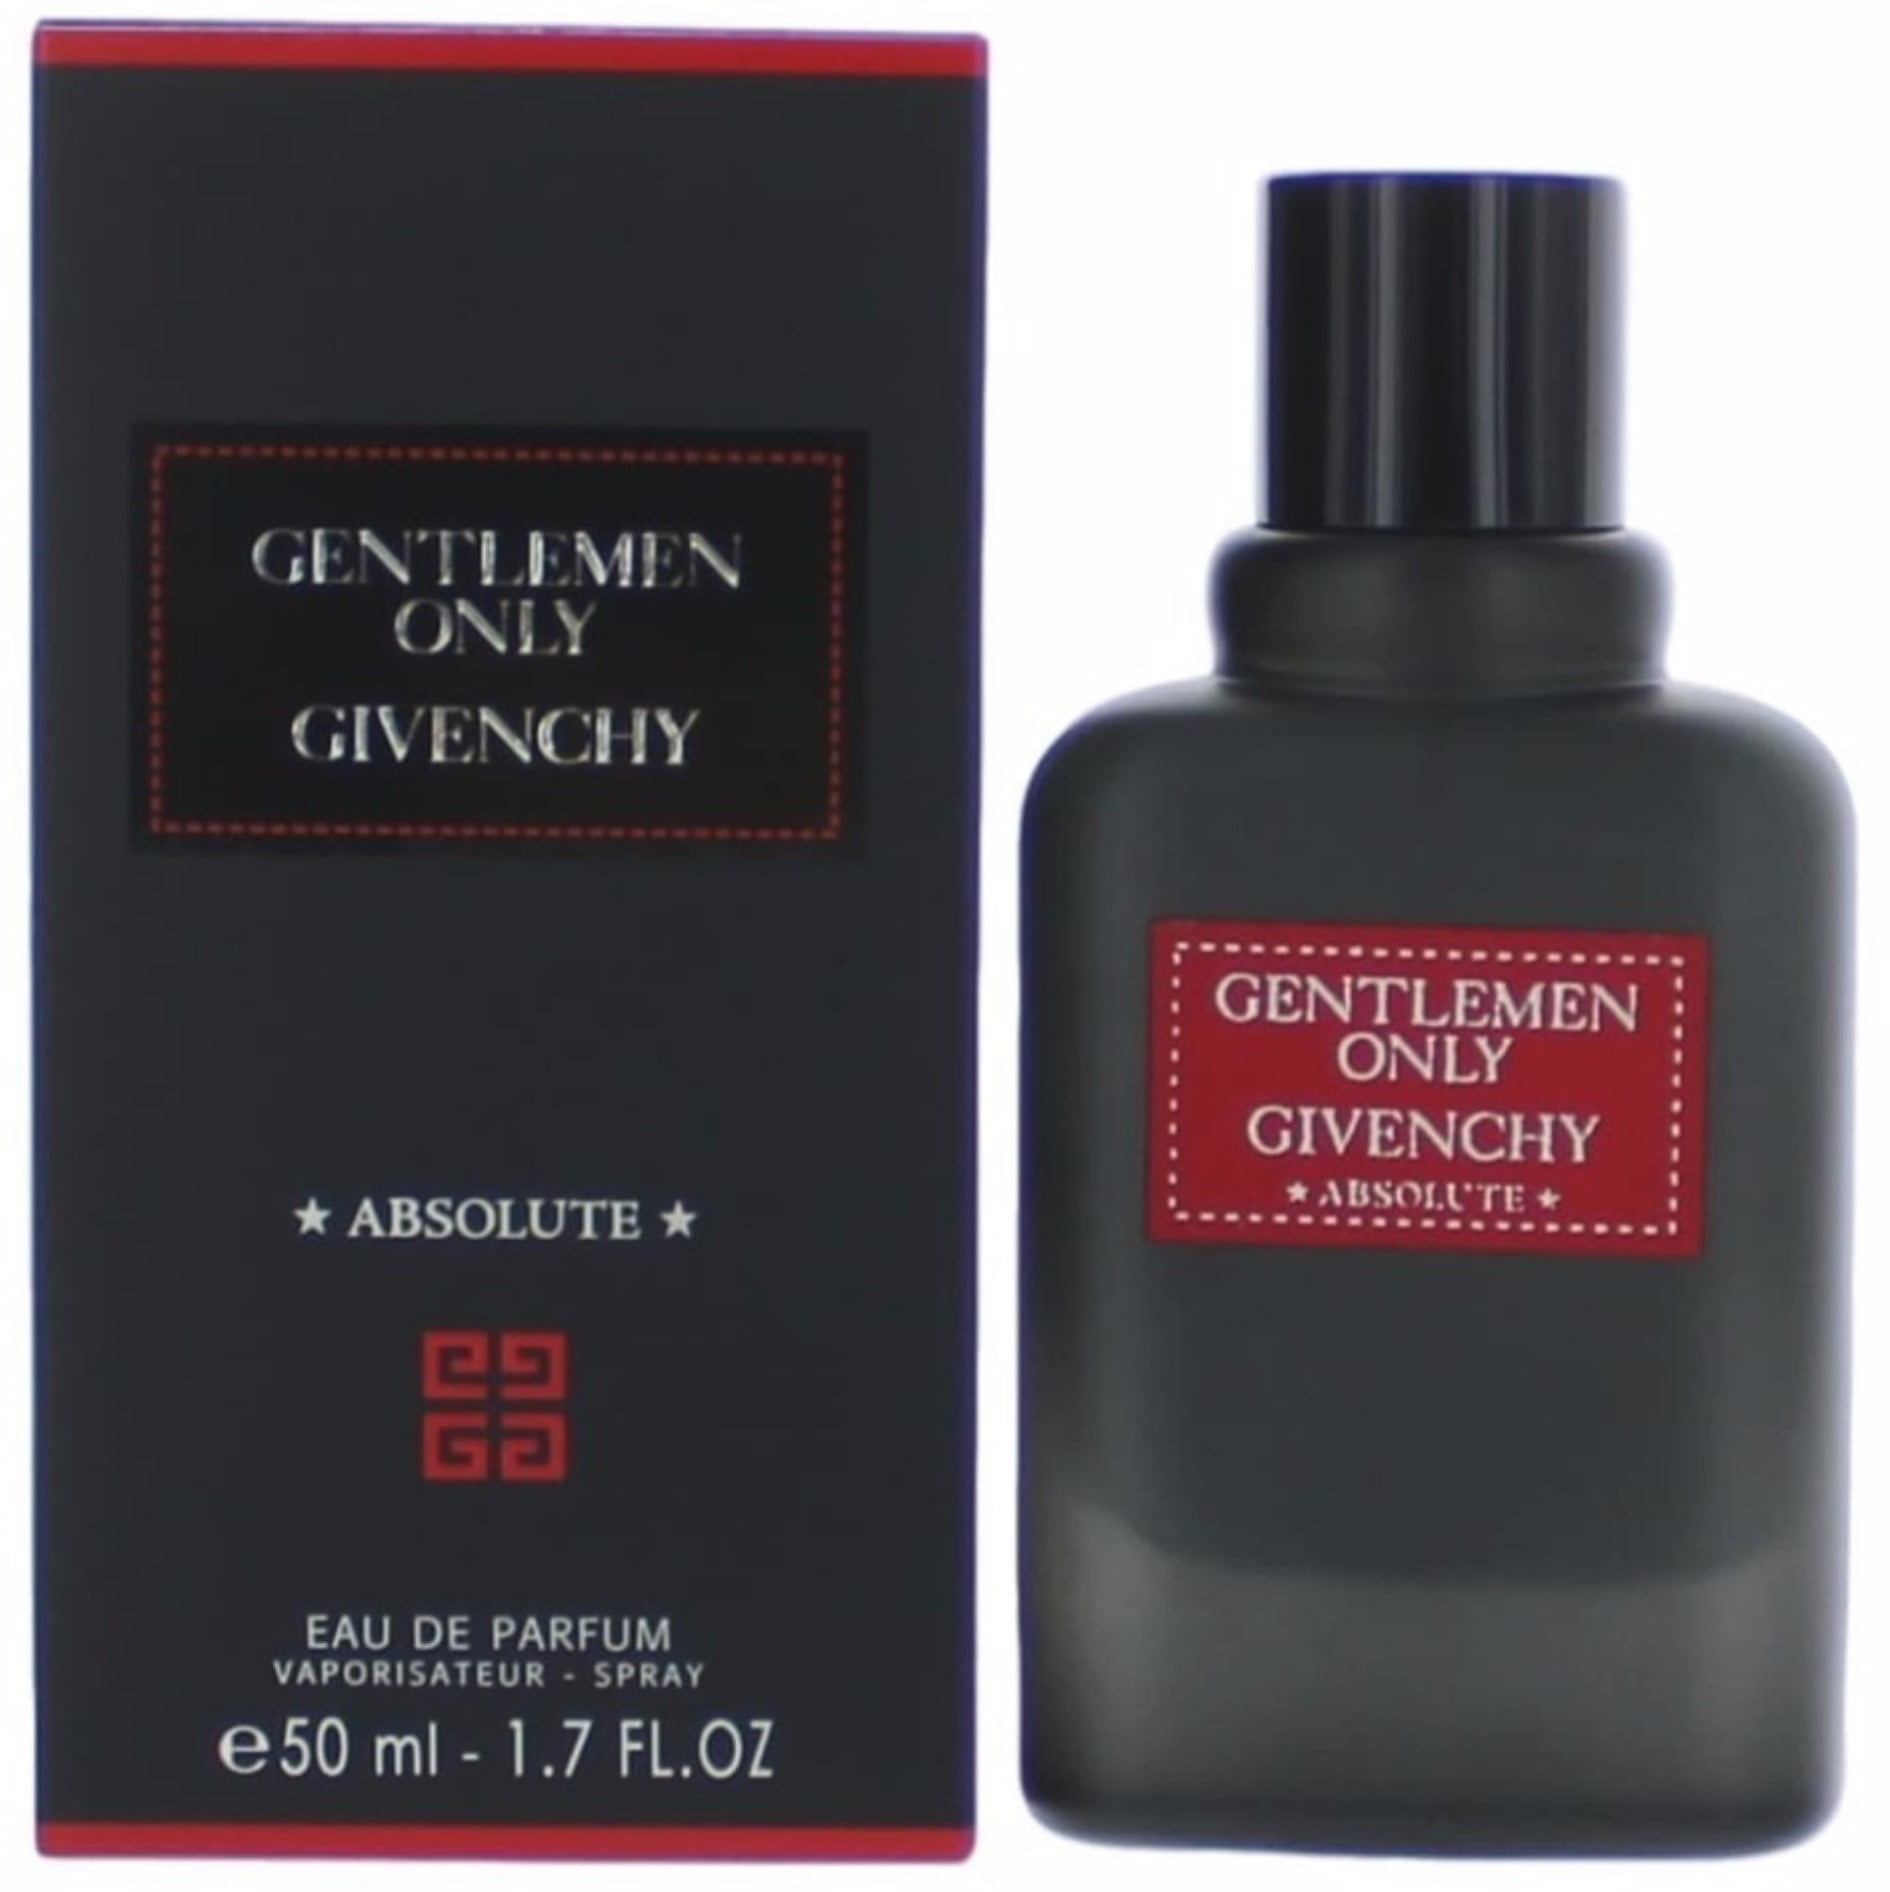 Only absolute. Духи живанши Онли джентльмен. Givenchy Gentleman EDP 50ml. Gentleman Givenchy Cologne мужской. Givenchy only absolute.